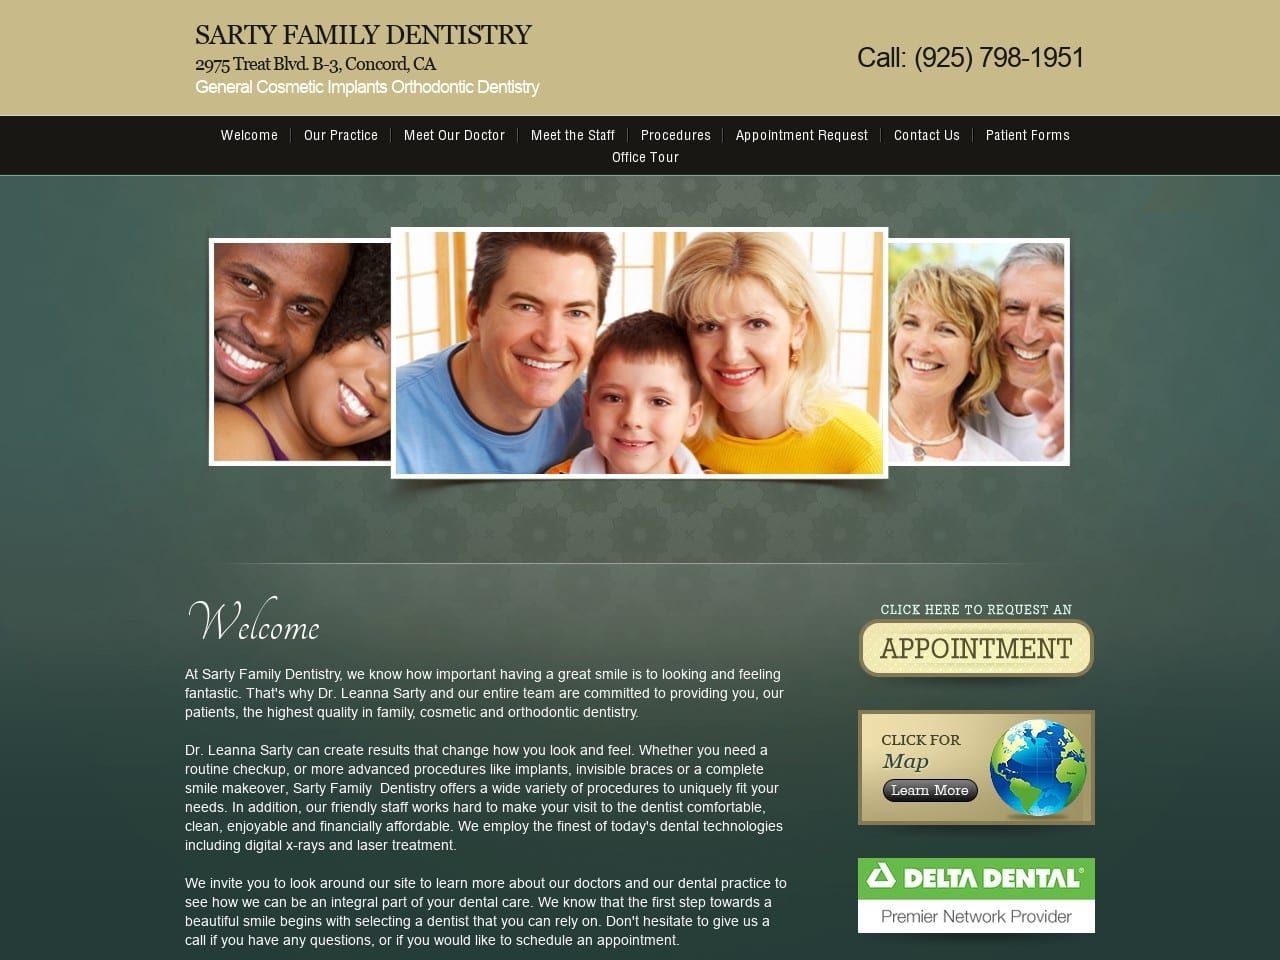 Sarty Family Dentist Website Screenshot from sarty.net